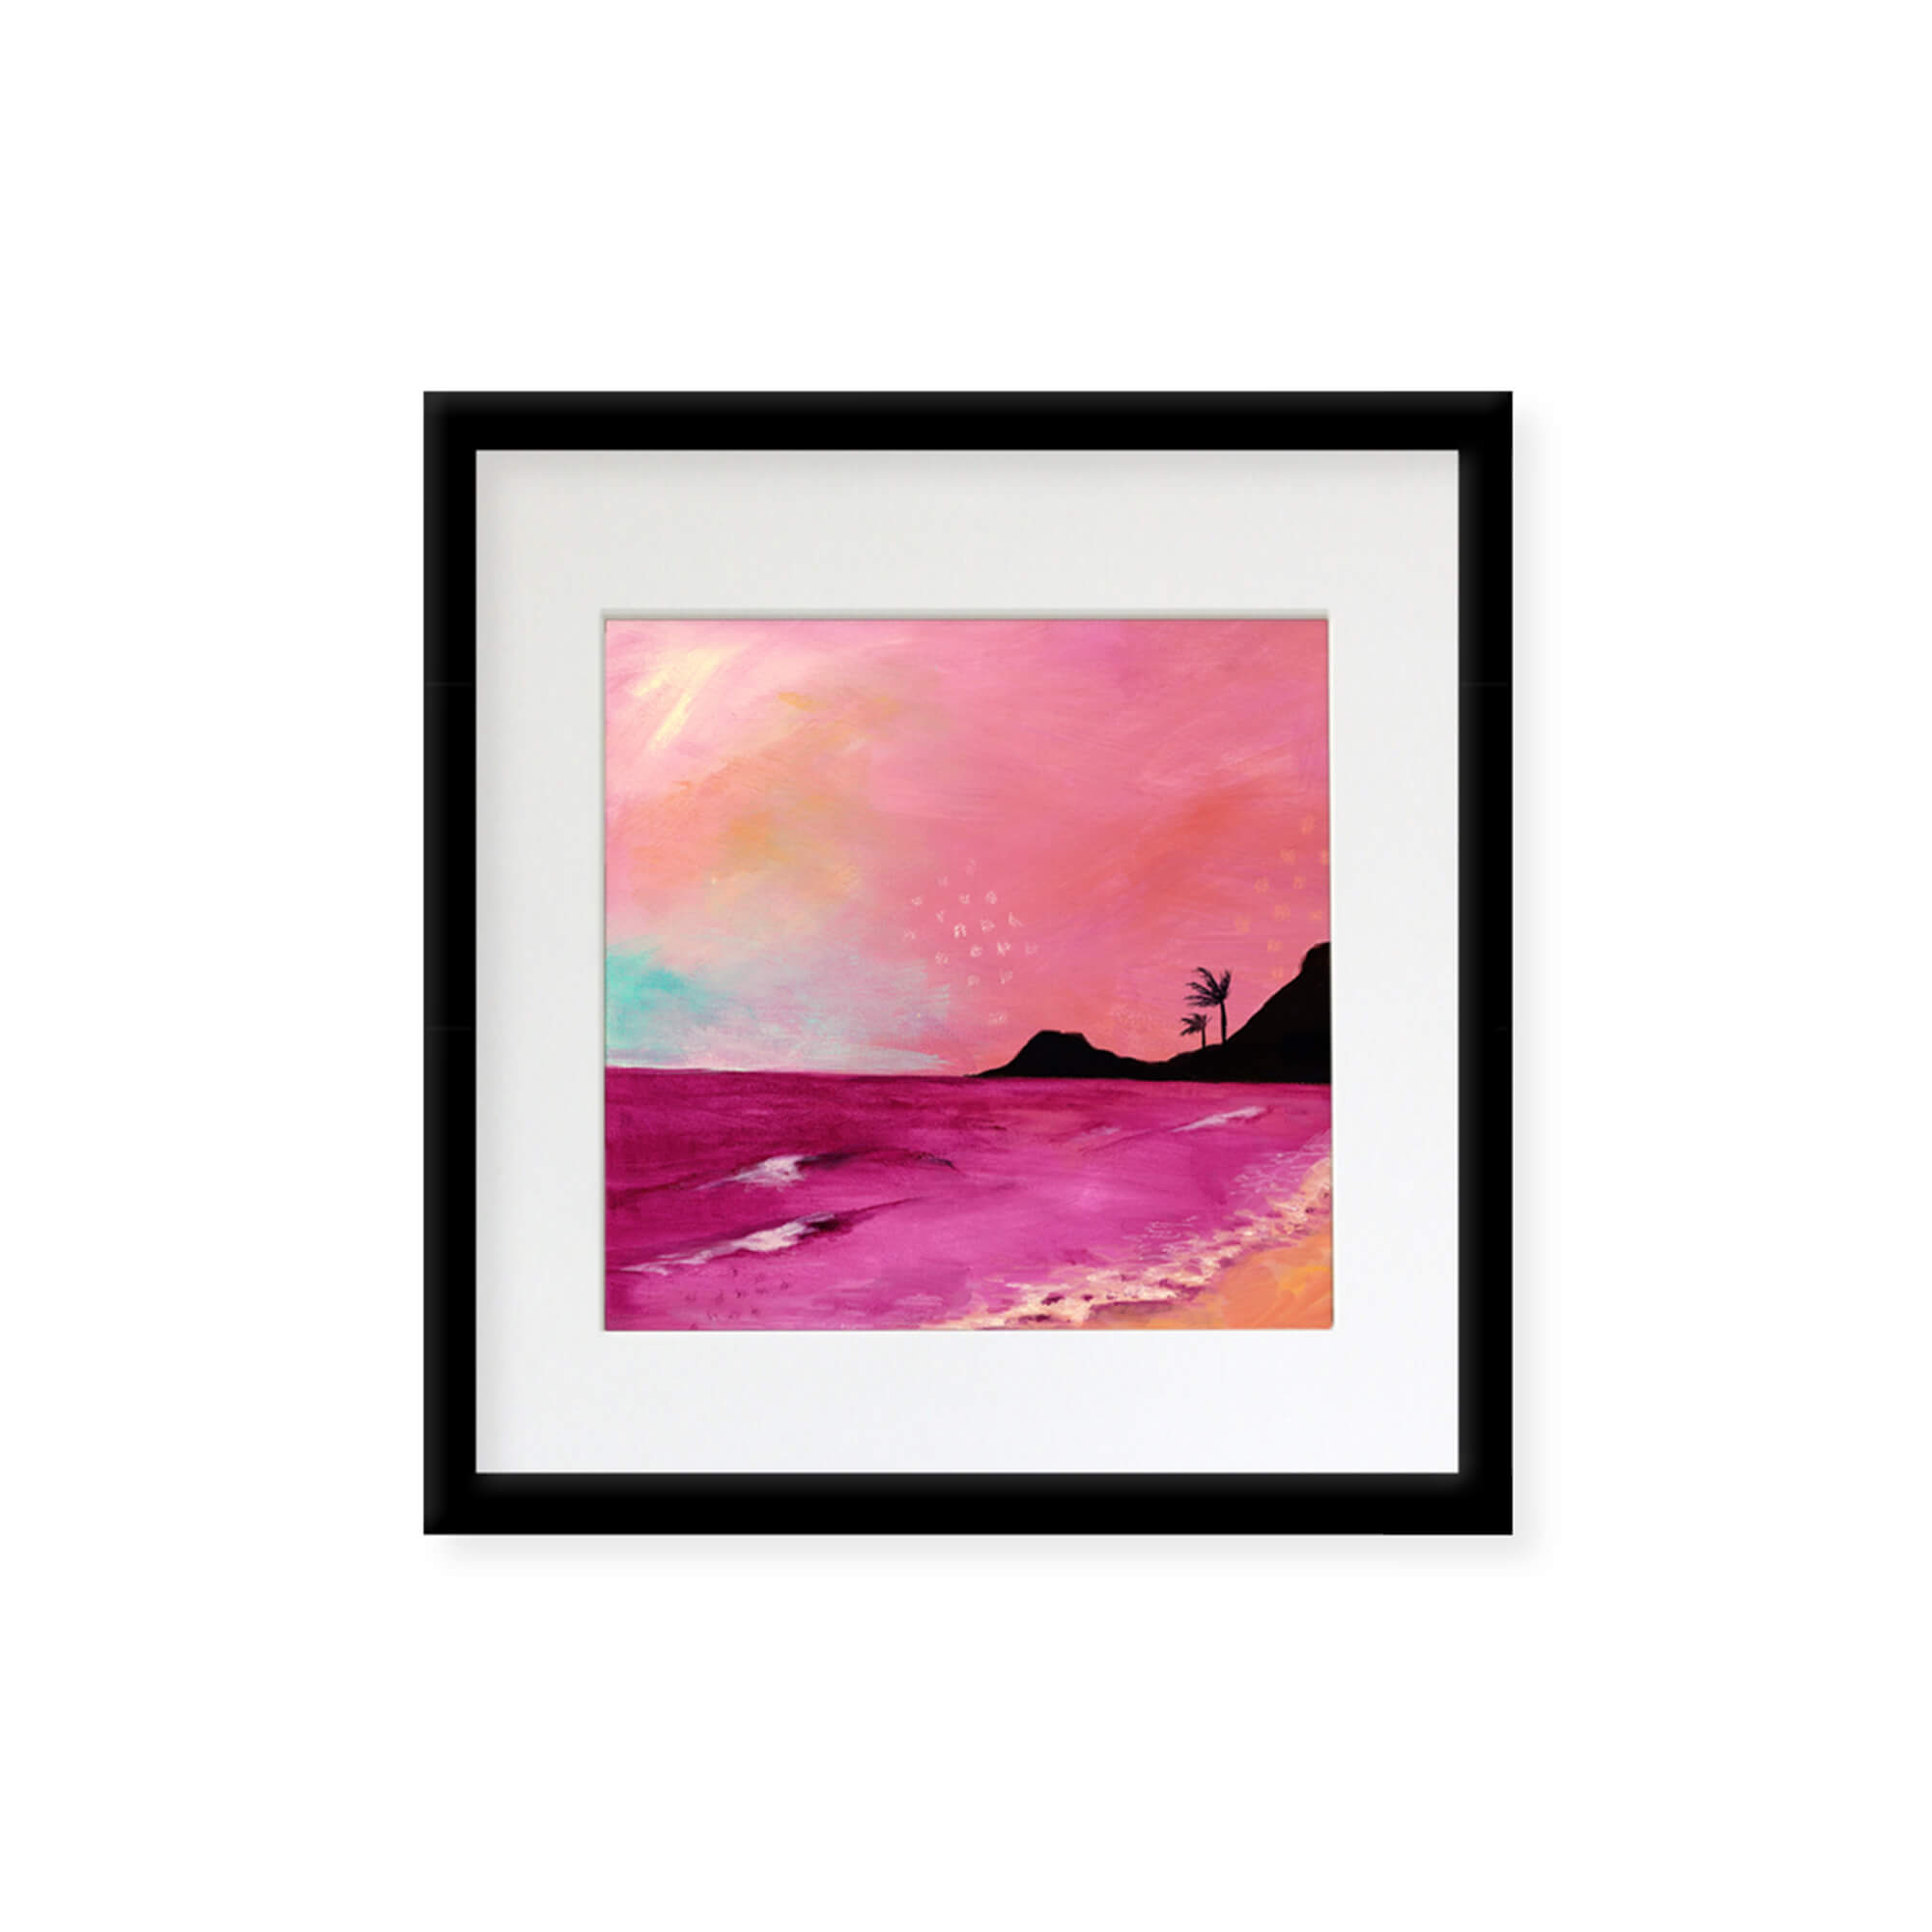 A seascape with shades of light and dark  pink by Hawaii artist Lindsay Wilkins